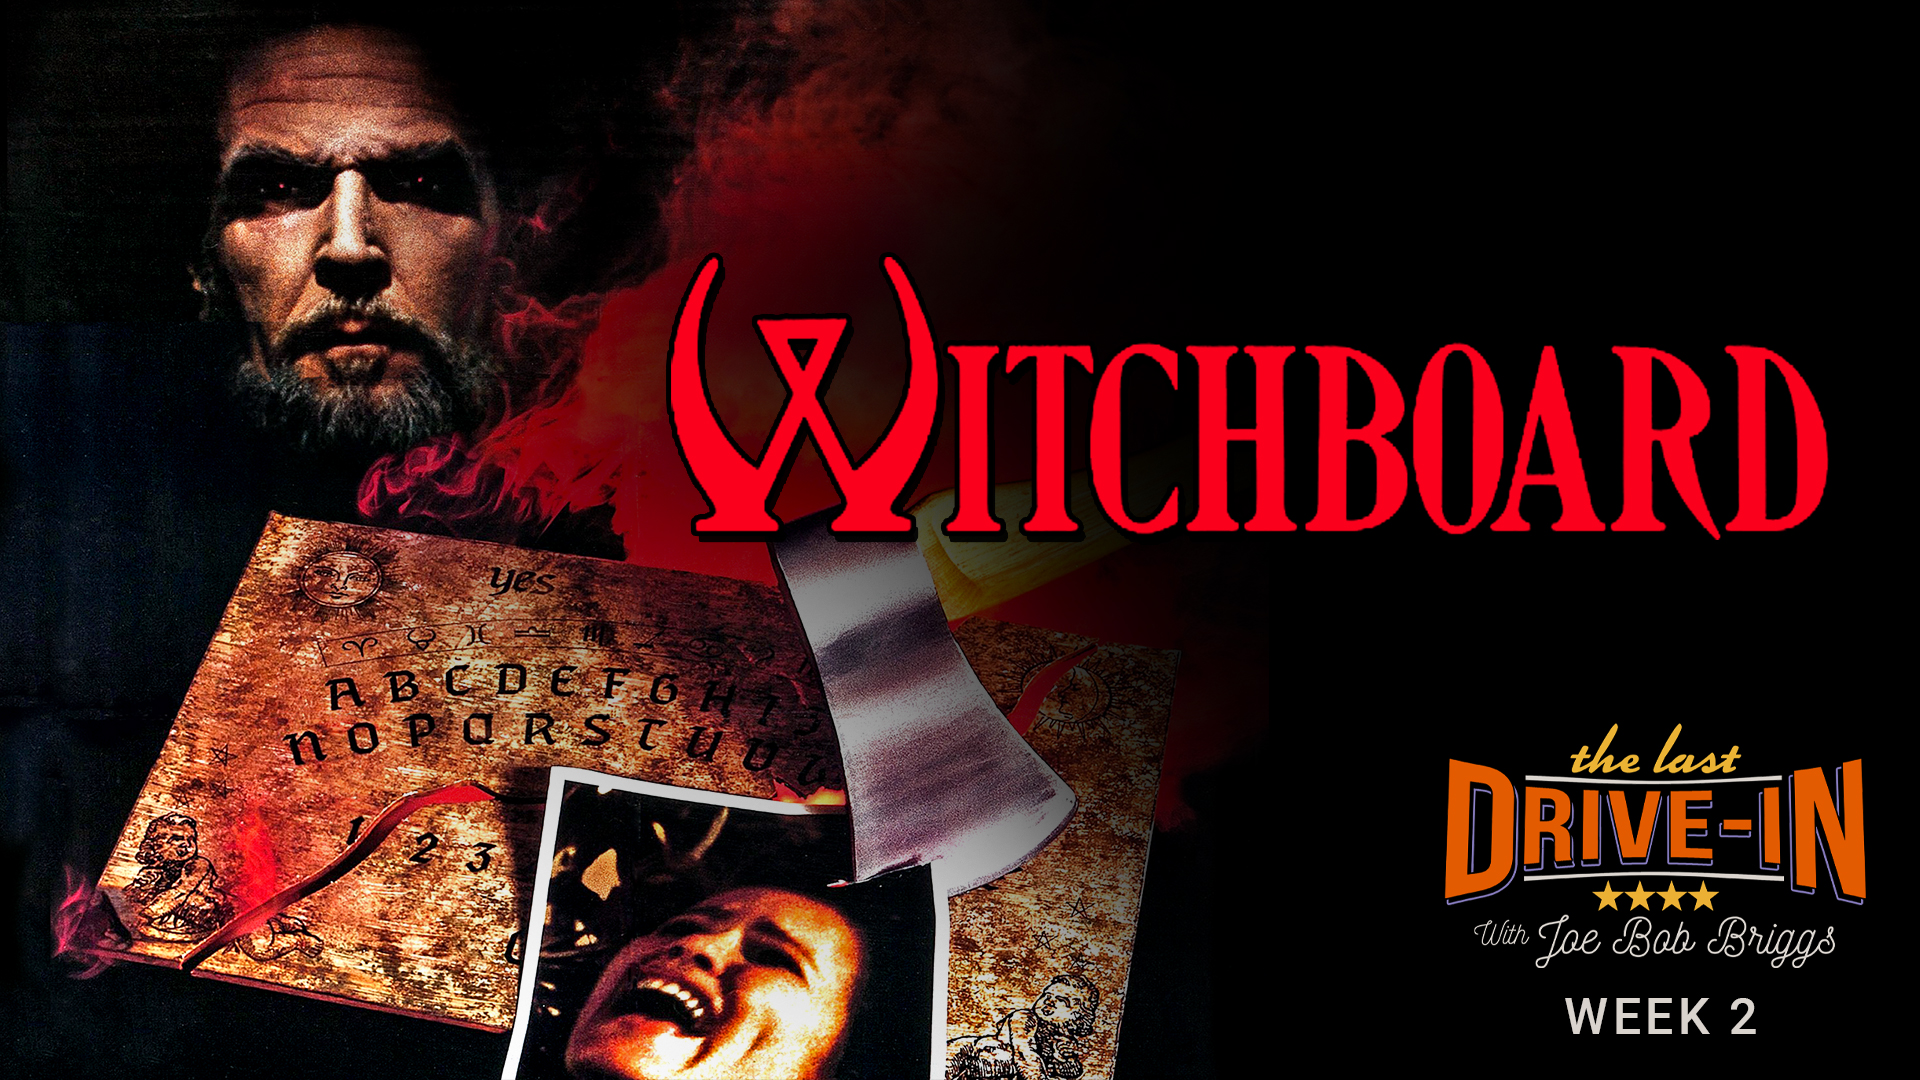 Week 2: Witchboard, A woman calls forth an evil spirit using a Ouija board., TV-MA, Season 1062609, Episode 3